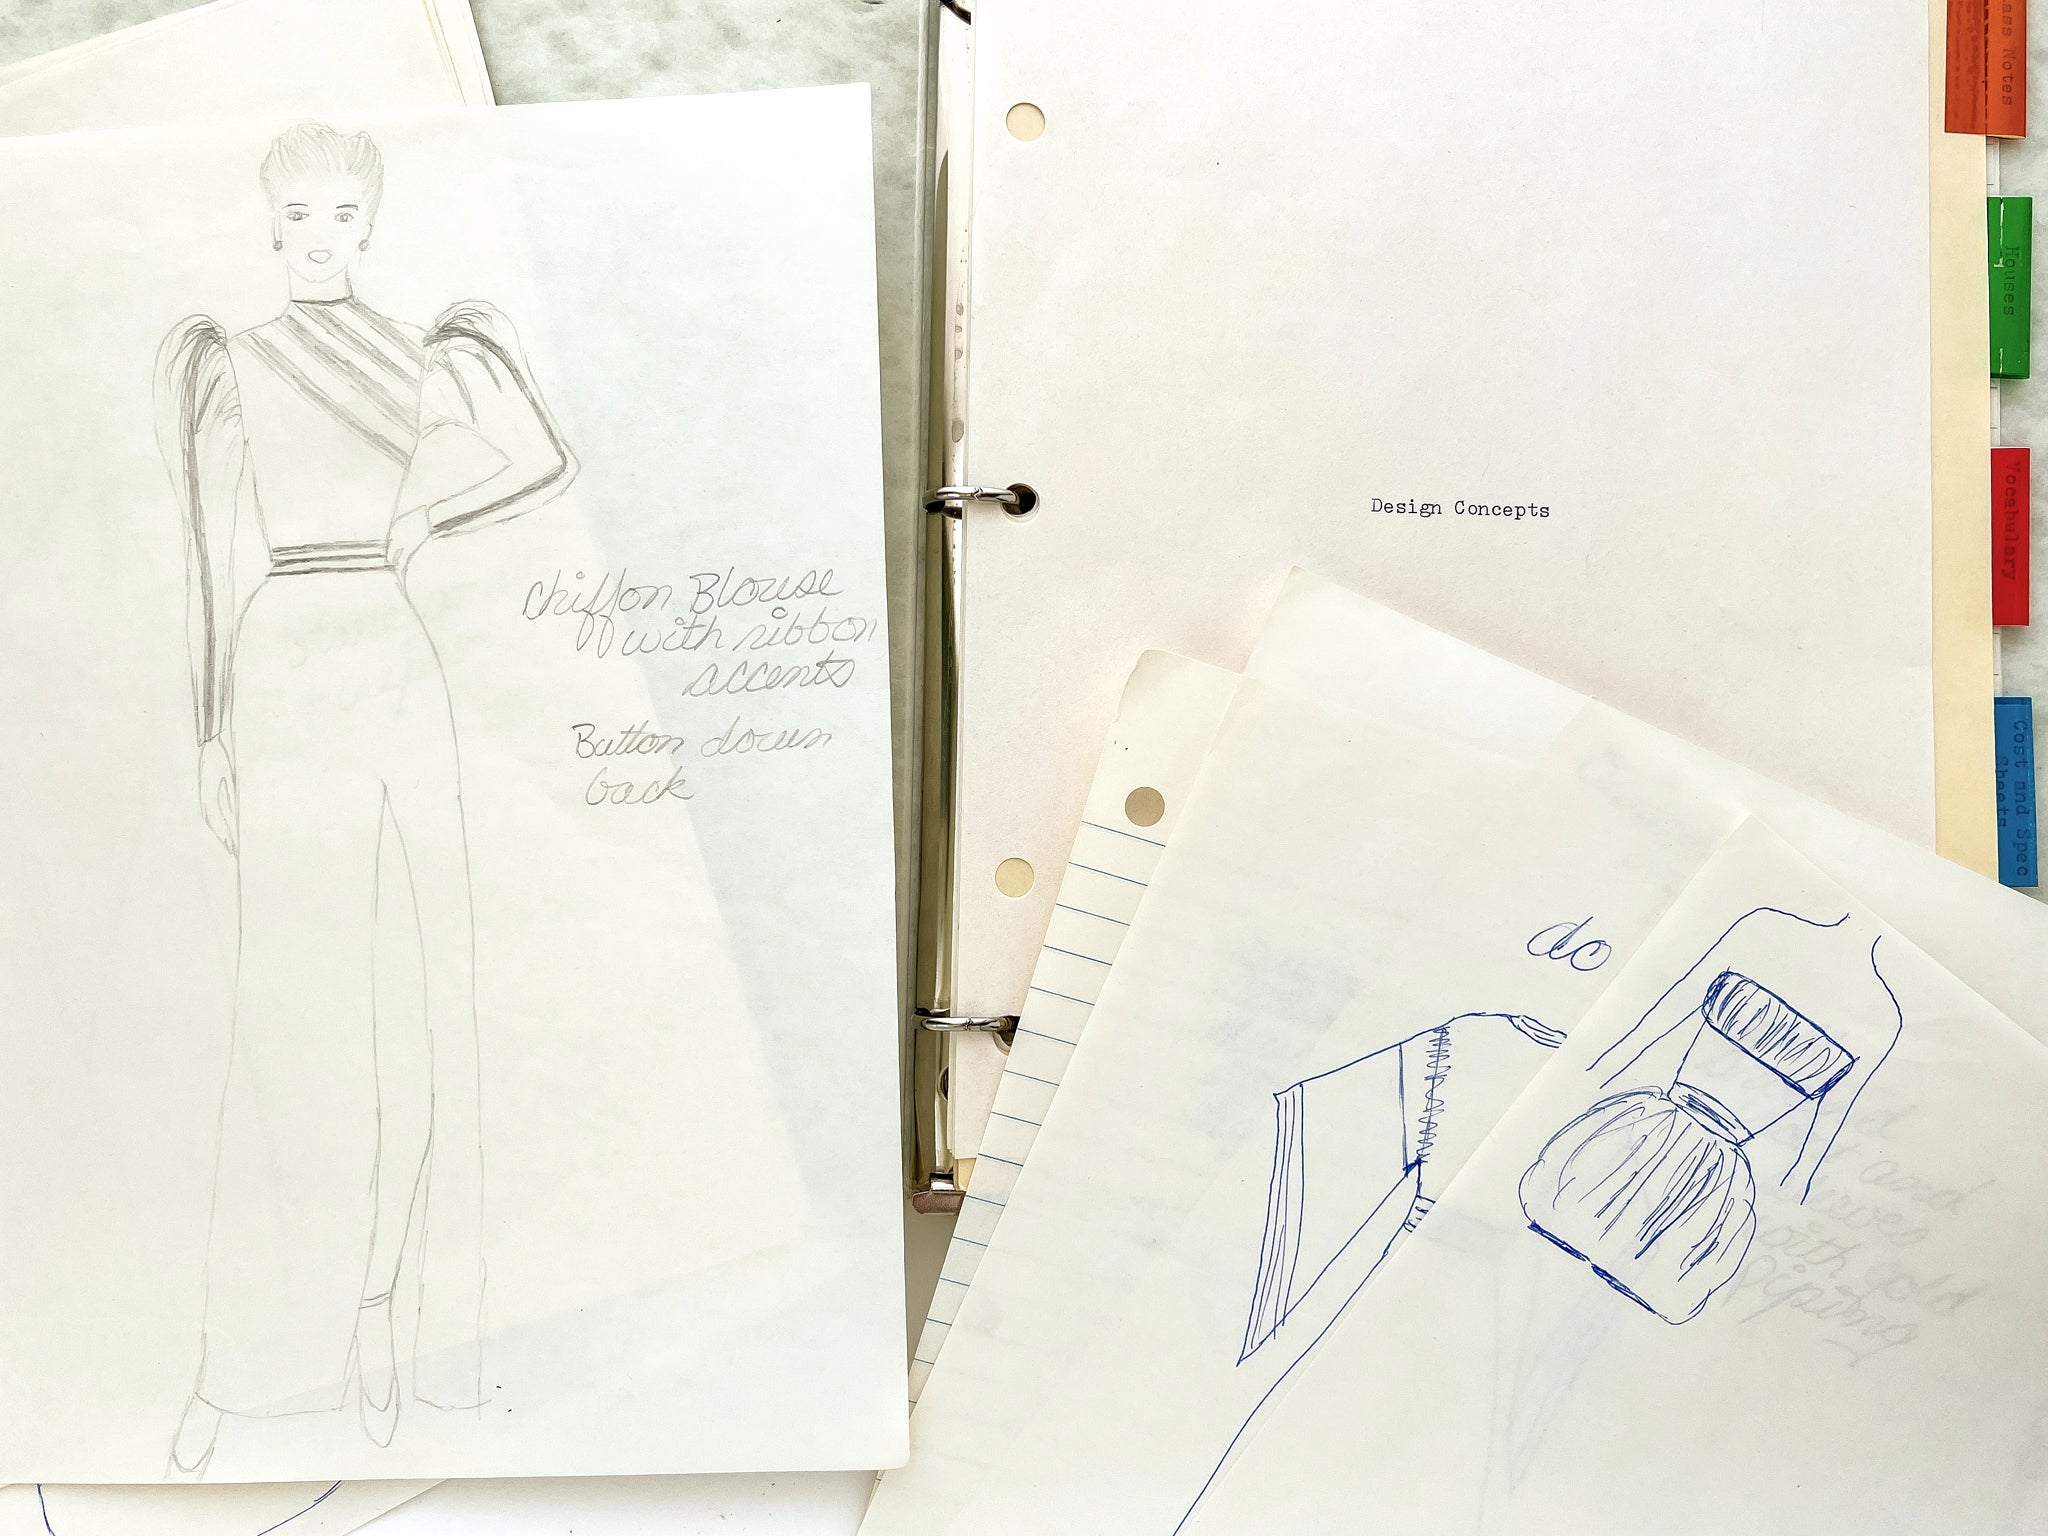 Design Concepts Binder notebook from introductory fashion course, with design sketches and mockups with